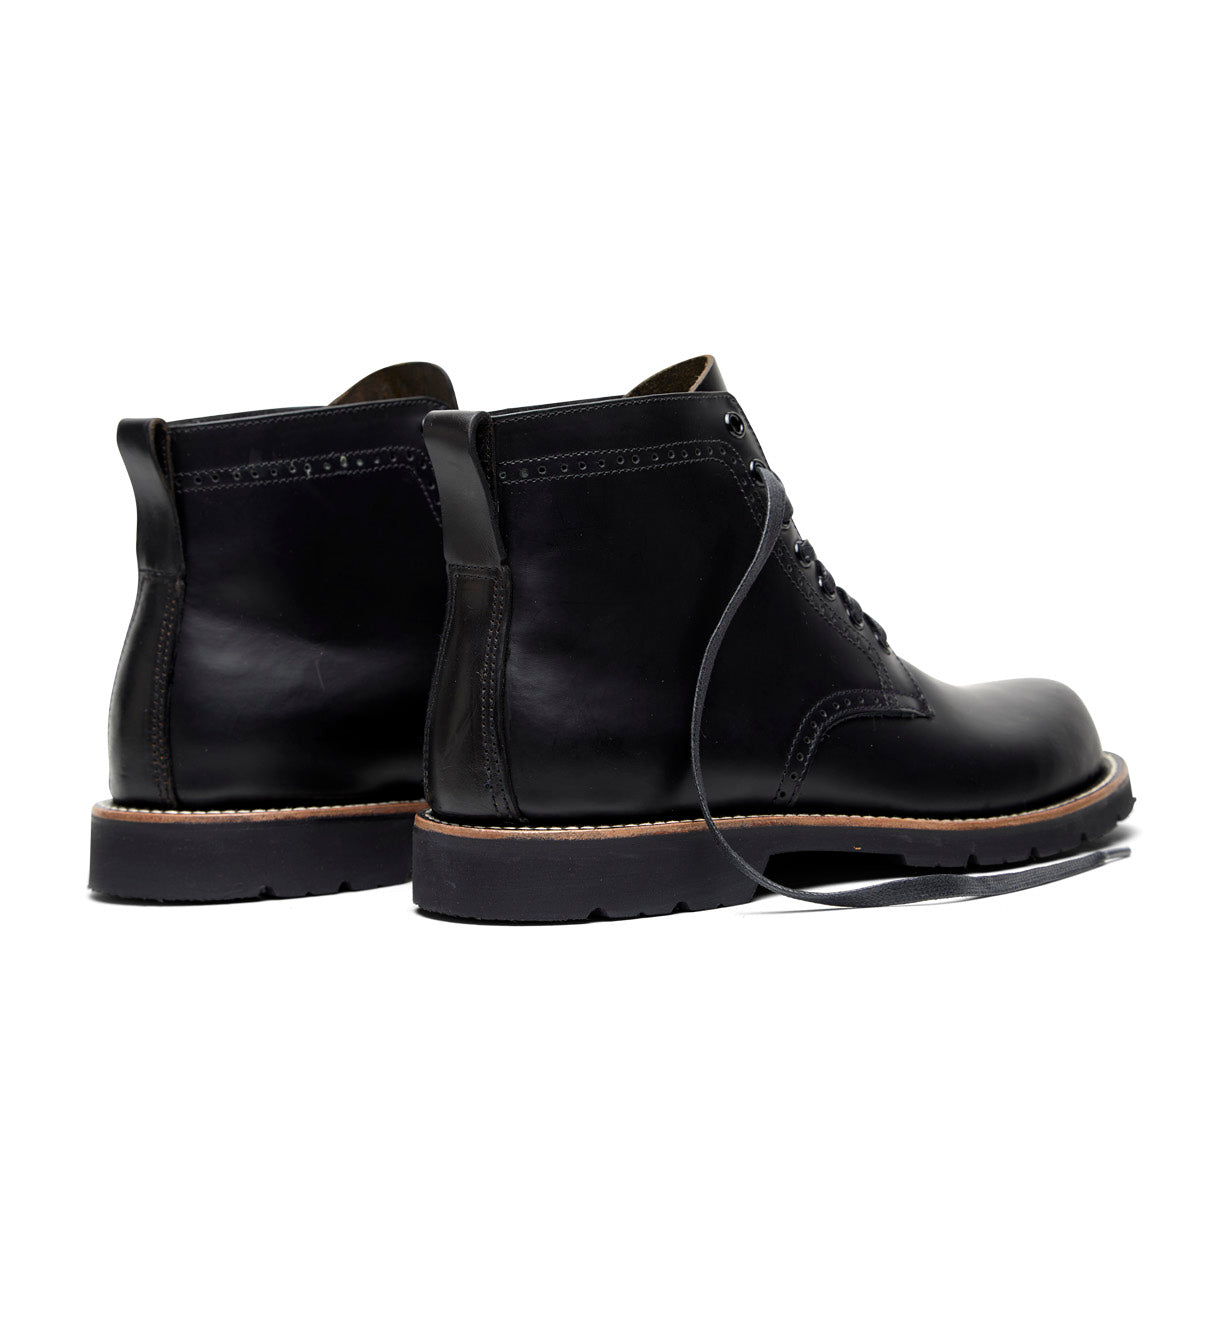 A pair of Tydus black boots with a refined style on a white background by Broken Homme.